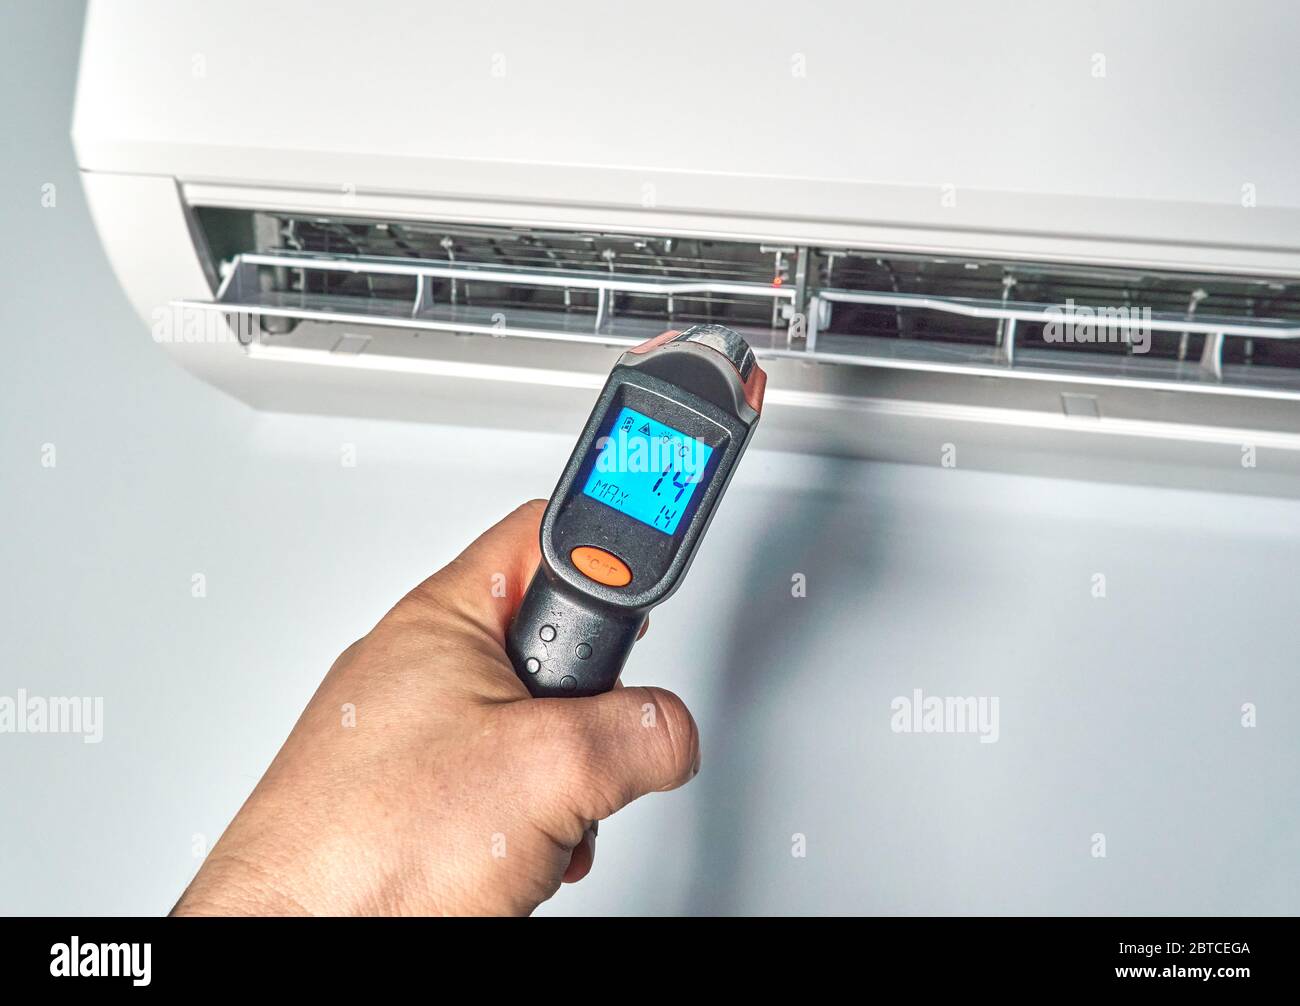 https://c8.alamy.com/comp/2BTCEGA/engineer-checking-temperature-by-infrared-thermometer-inside-of-air-conditioner-checking-temperature-inside-of-an-air-conditioner-helps-to-troublesho-2BTCEGA.jpg